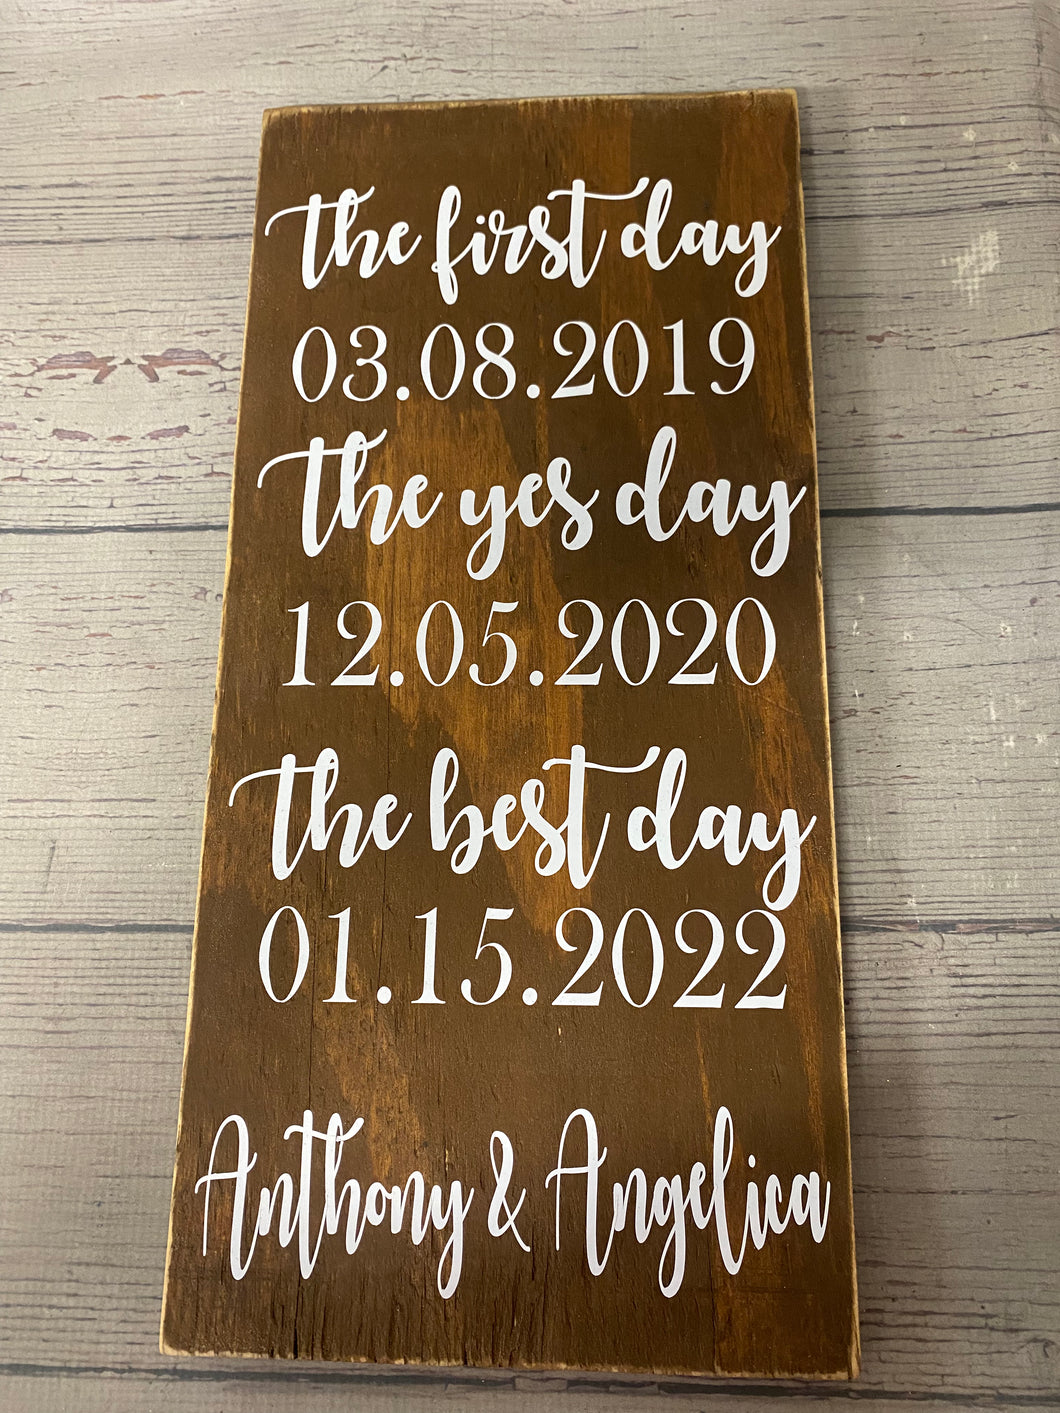 Personalized wedding date sign First Day Yes Day Best Day - Knot In Your House